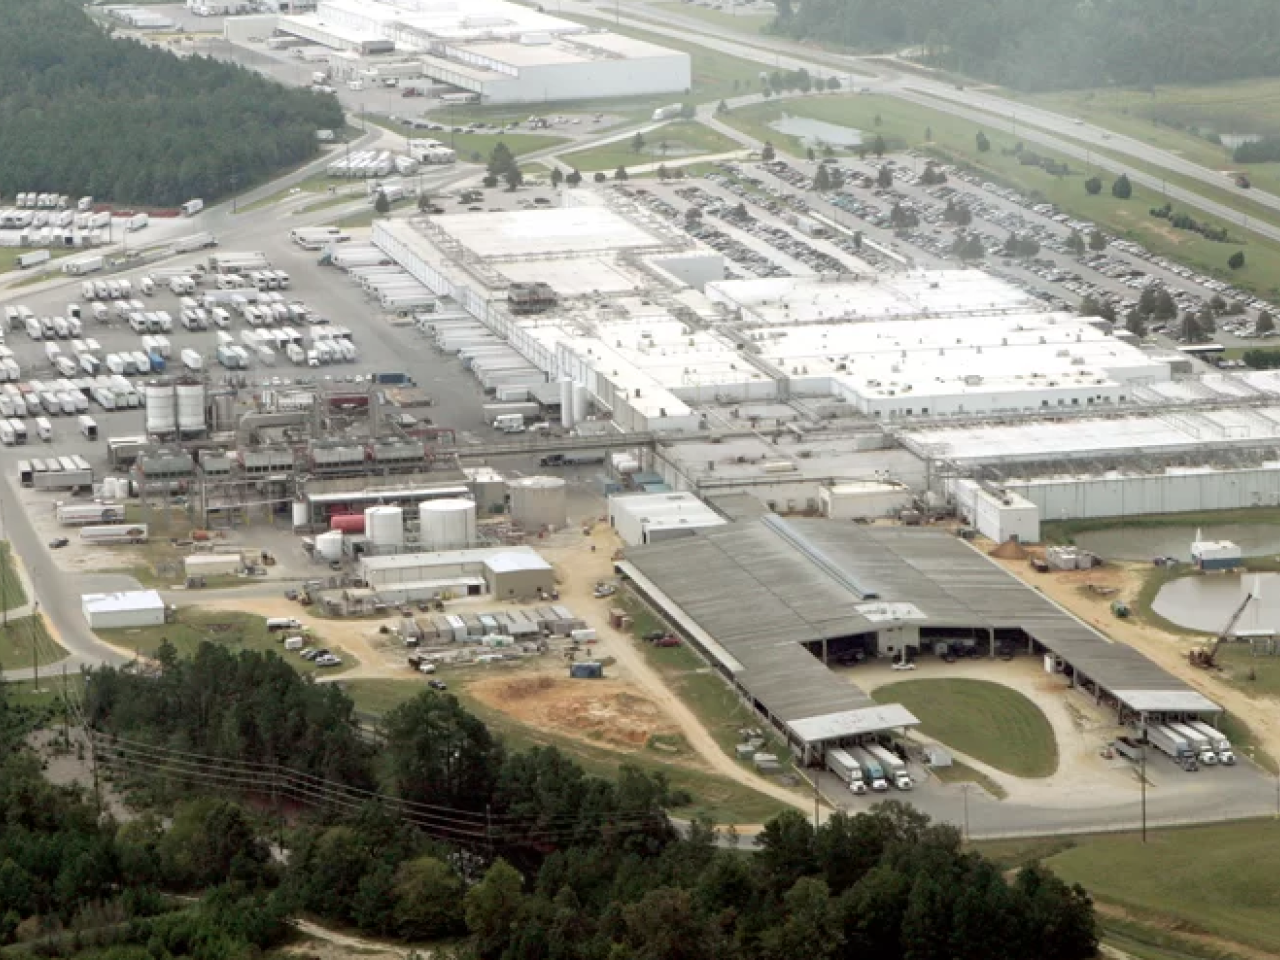 the largest hog slaughterhouse in the world. It is located in Tar Heel, North Carolina, operates under Smithfield Foods, Inc., and is wholly owned by the WH Group. Approximately 35,000 hogs are slaughtered there each day and waste is discharged into the Cape Fear River. 